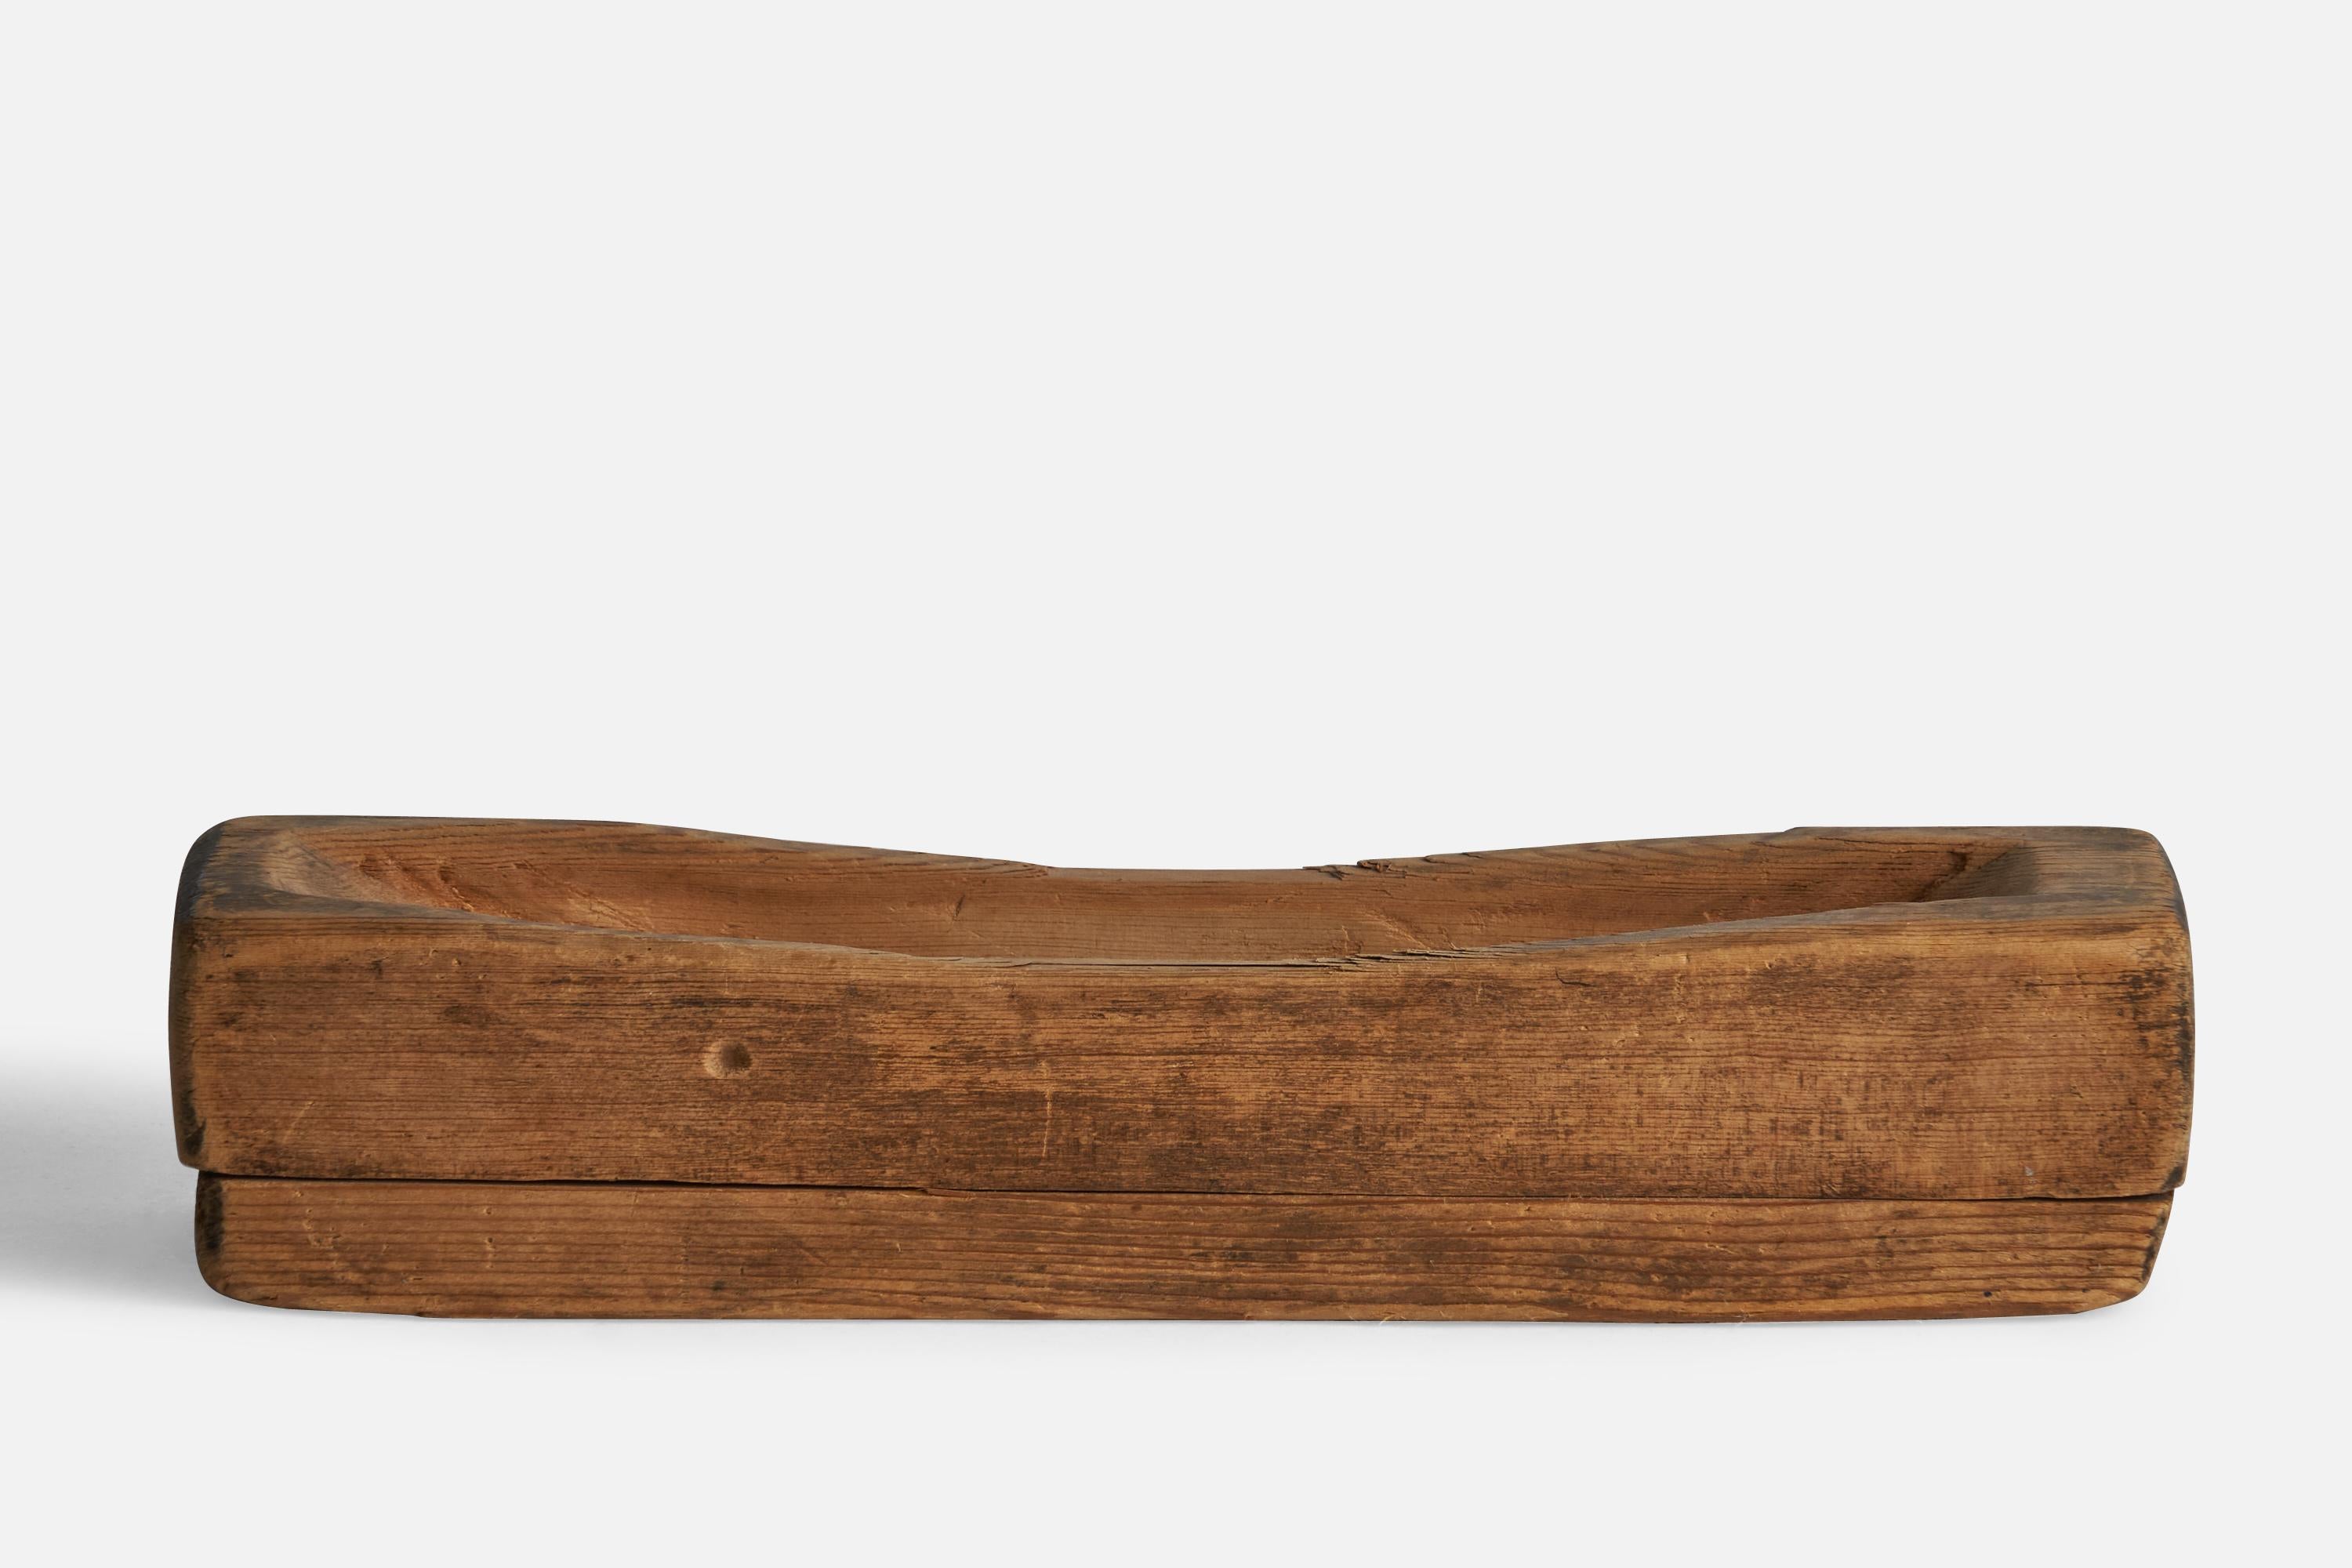 A small pine bowl produced in Sweden, 19th Century.